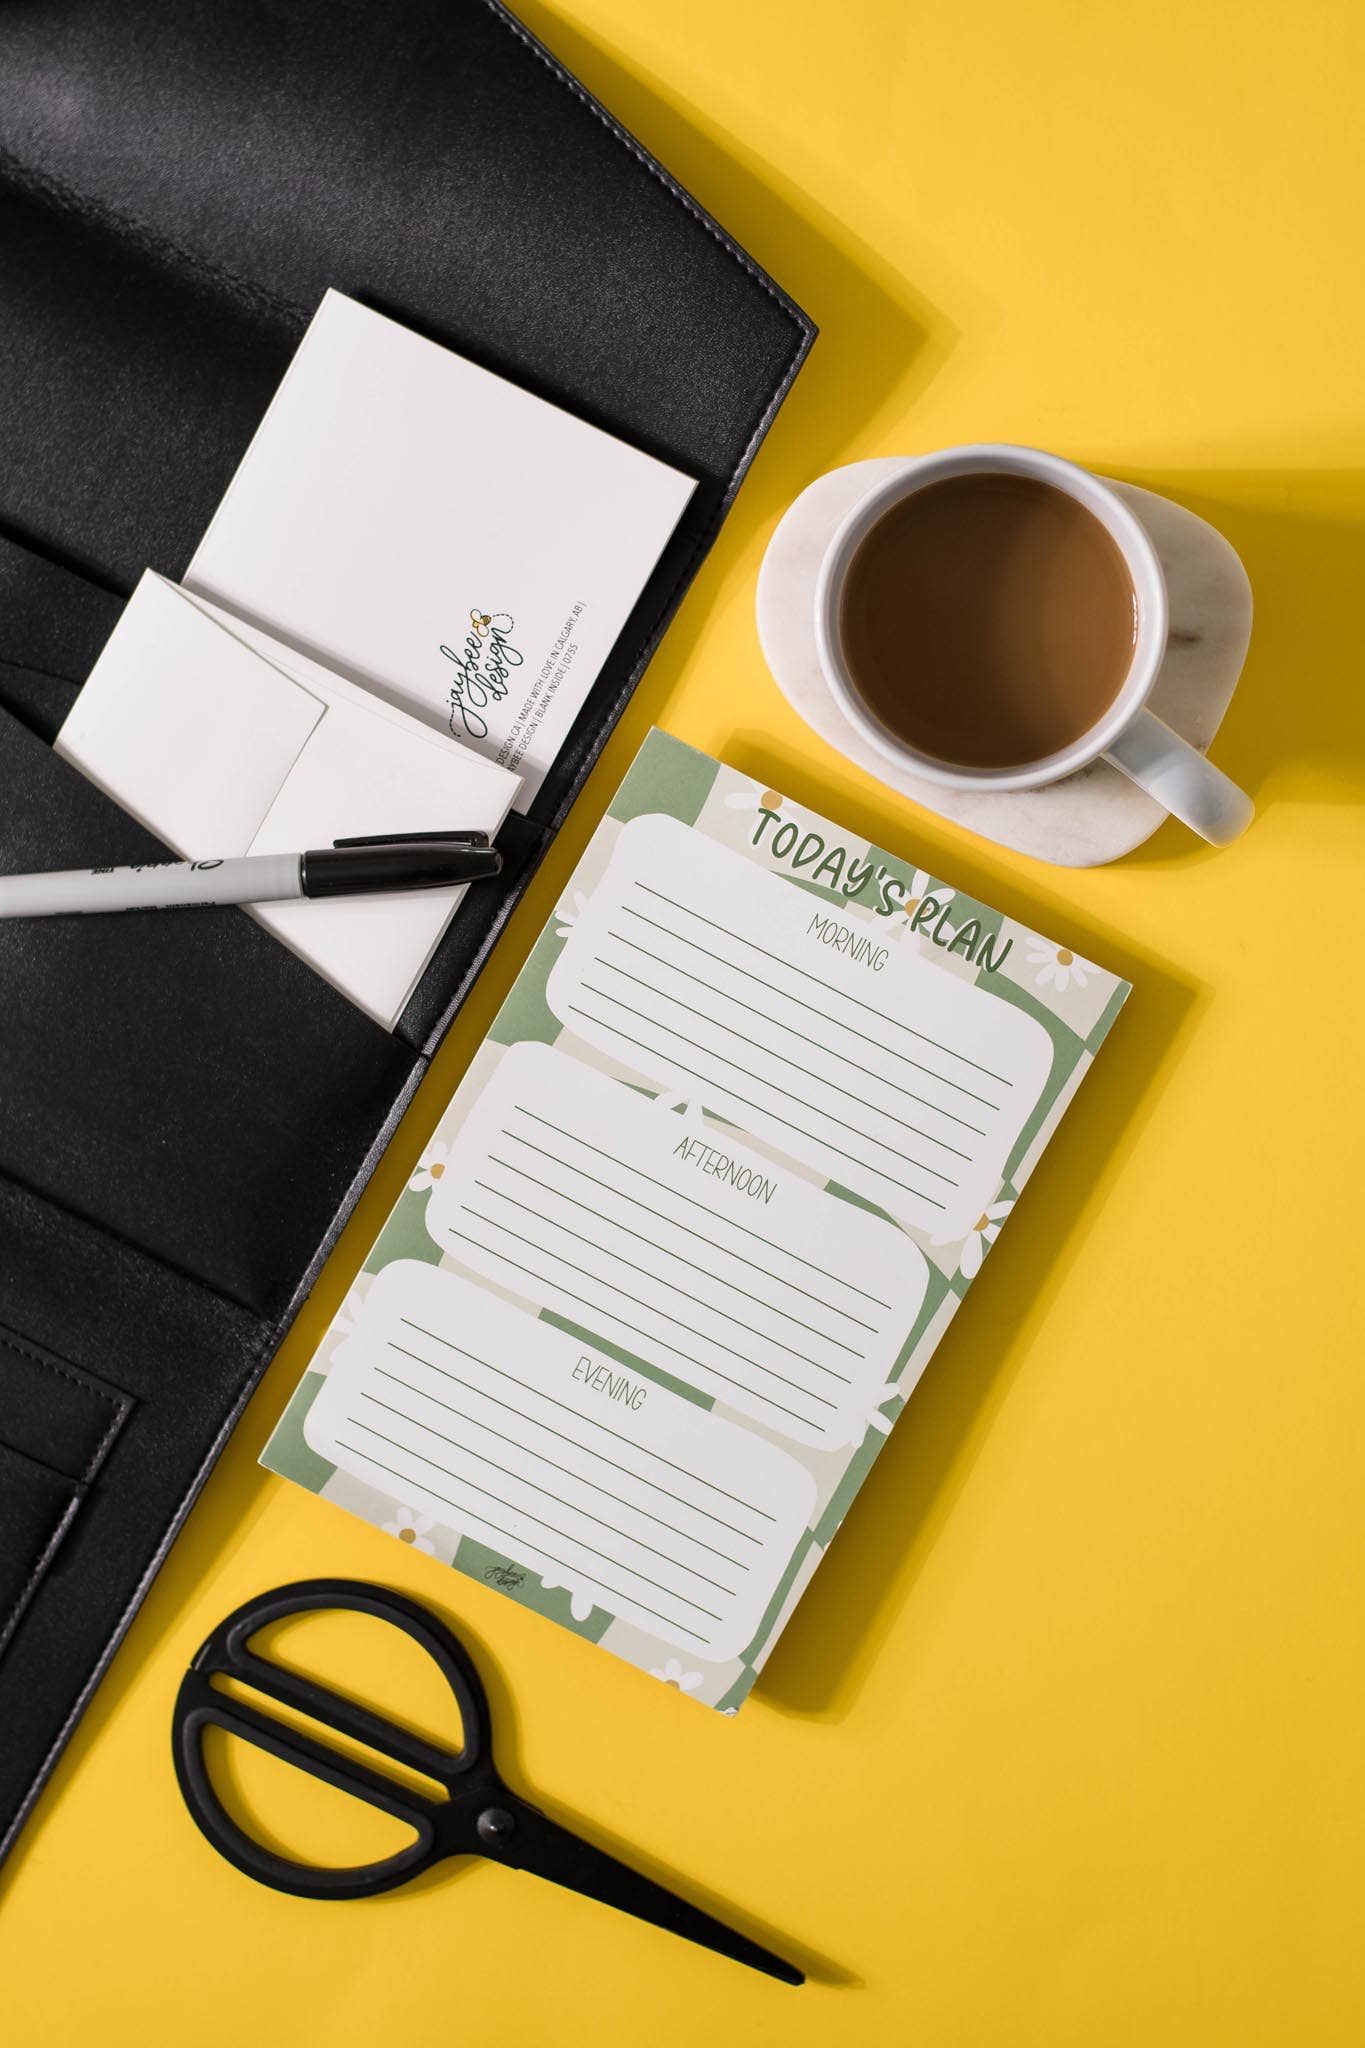 Jaybee Design - Retro Today's Plan Daily Planner - 25 pg Notepad